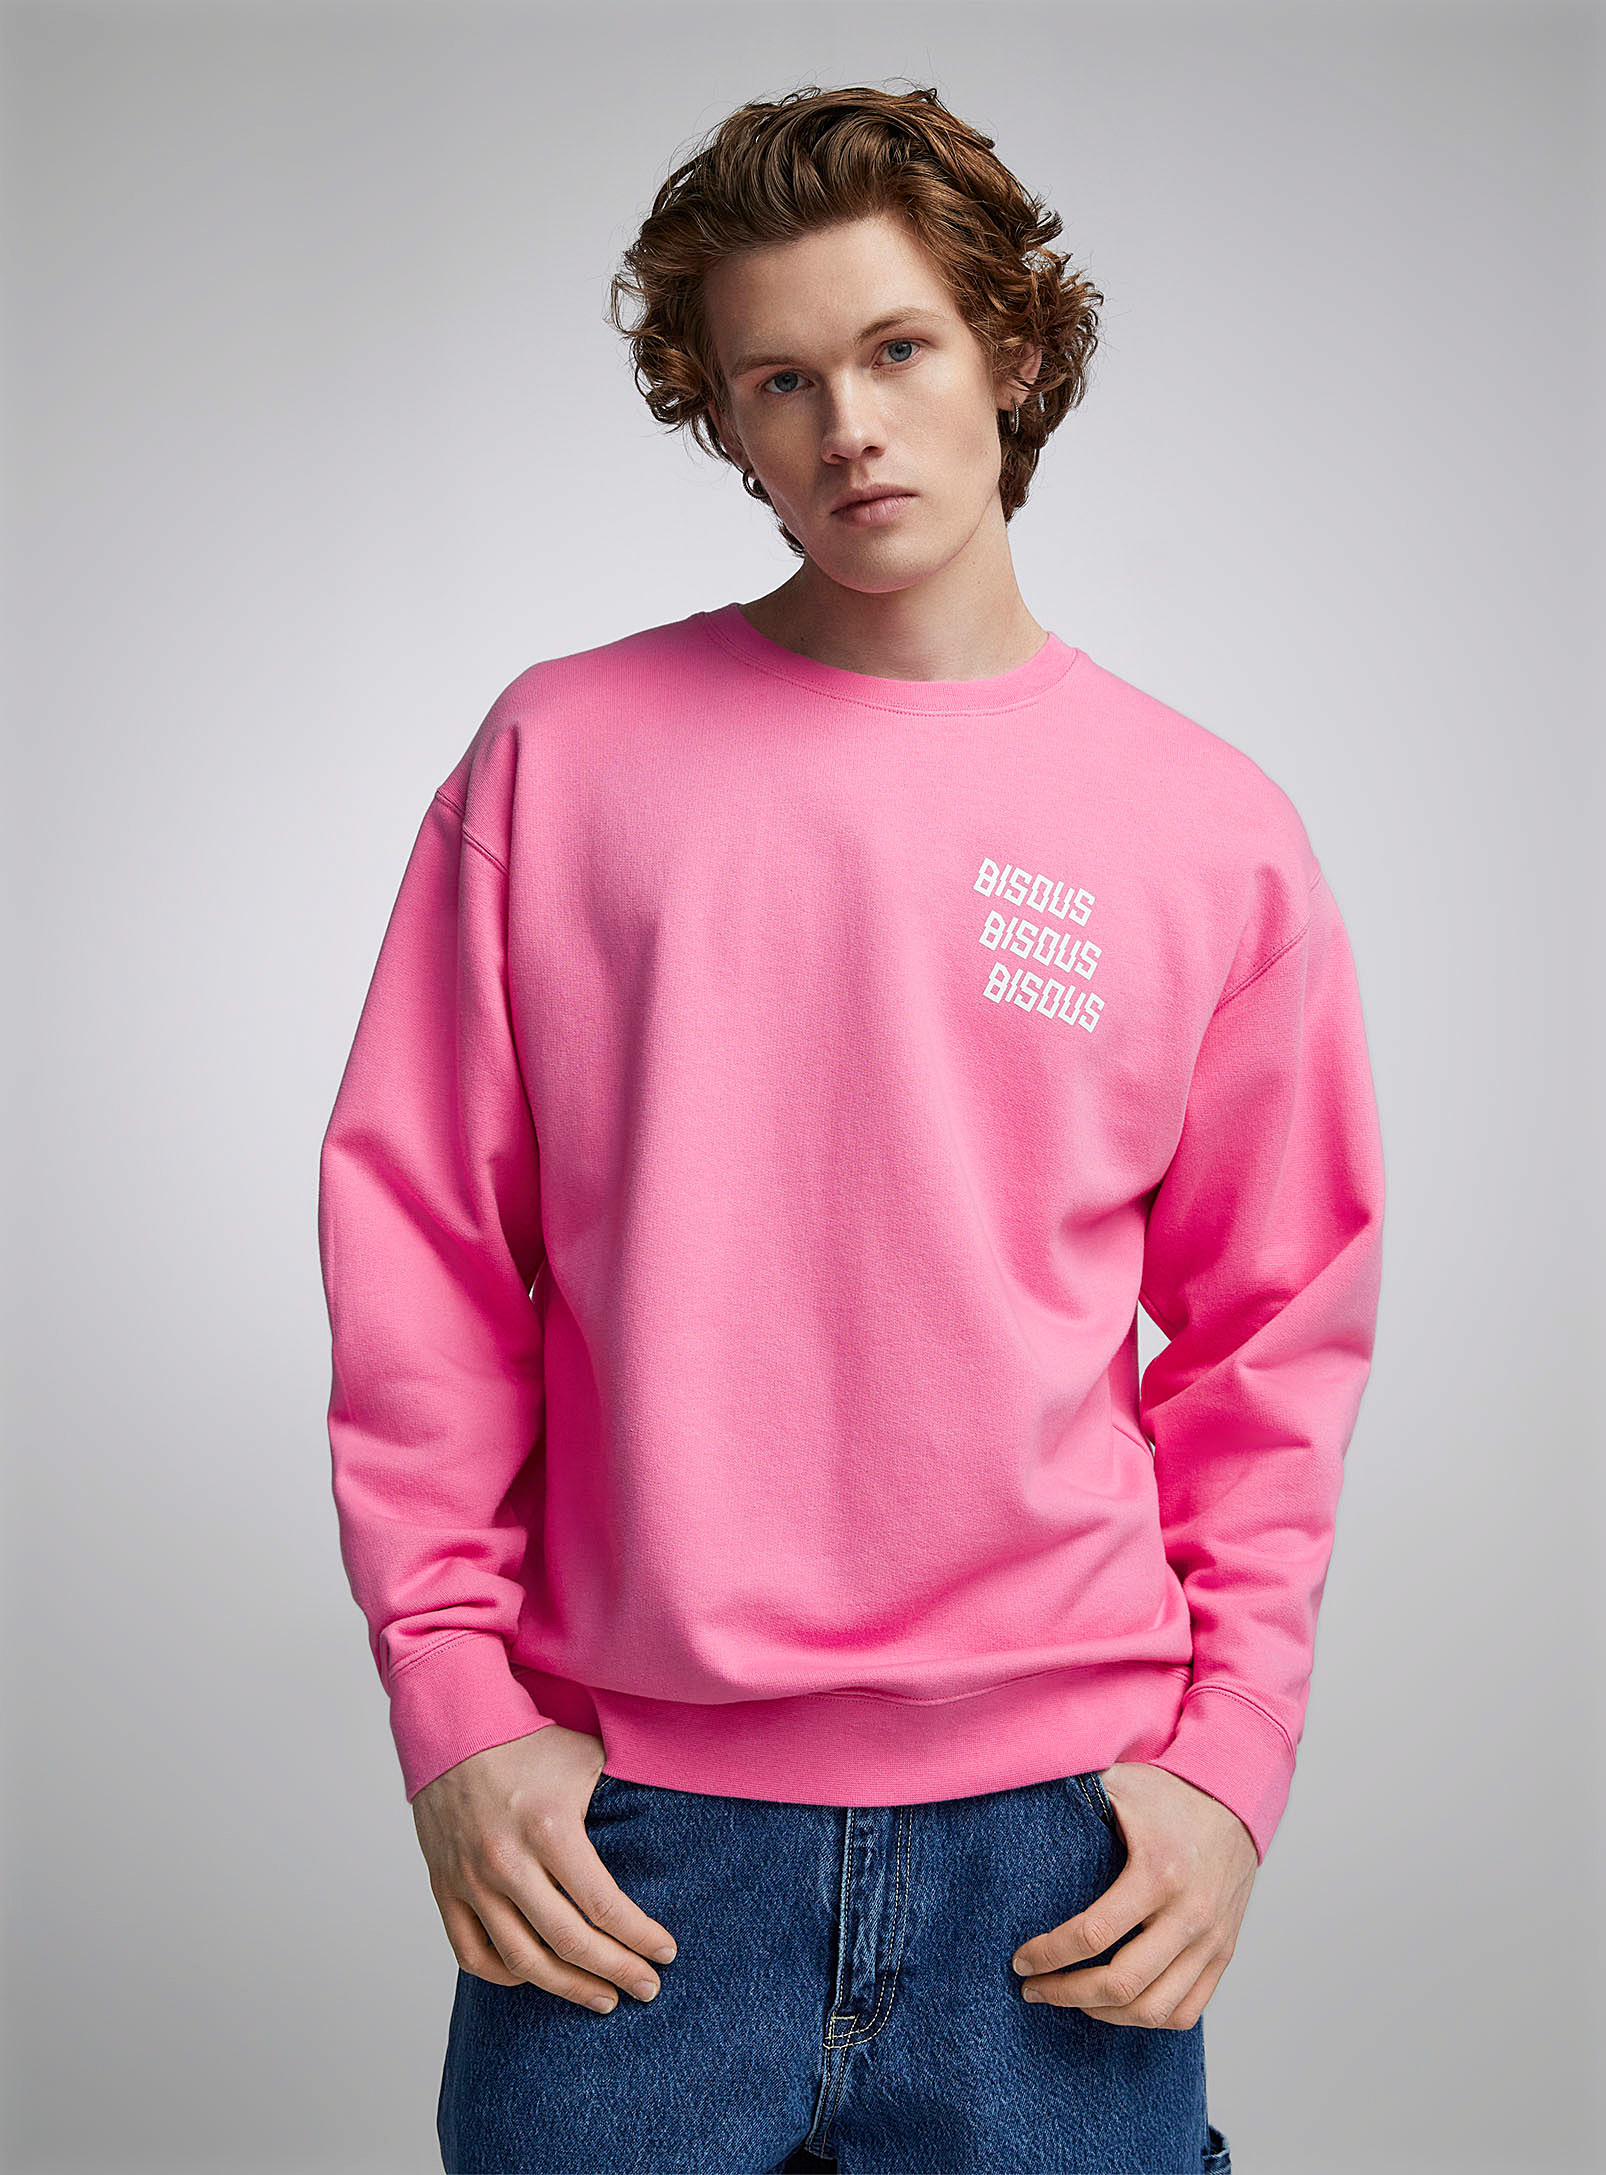 Bisous Skateboards - Le sweat X3